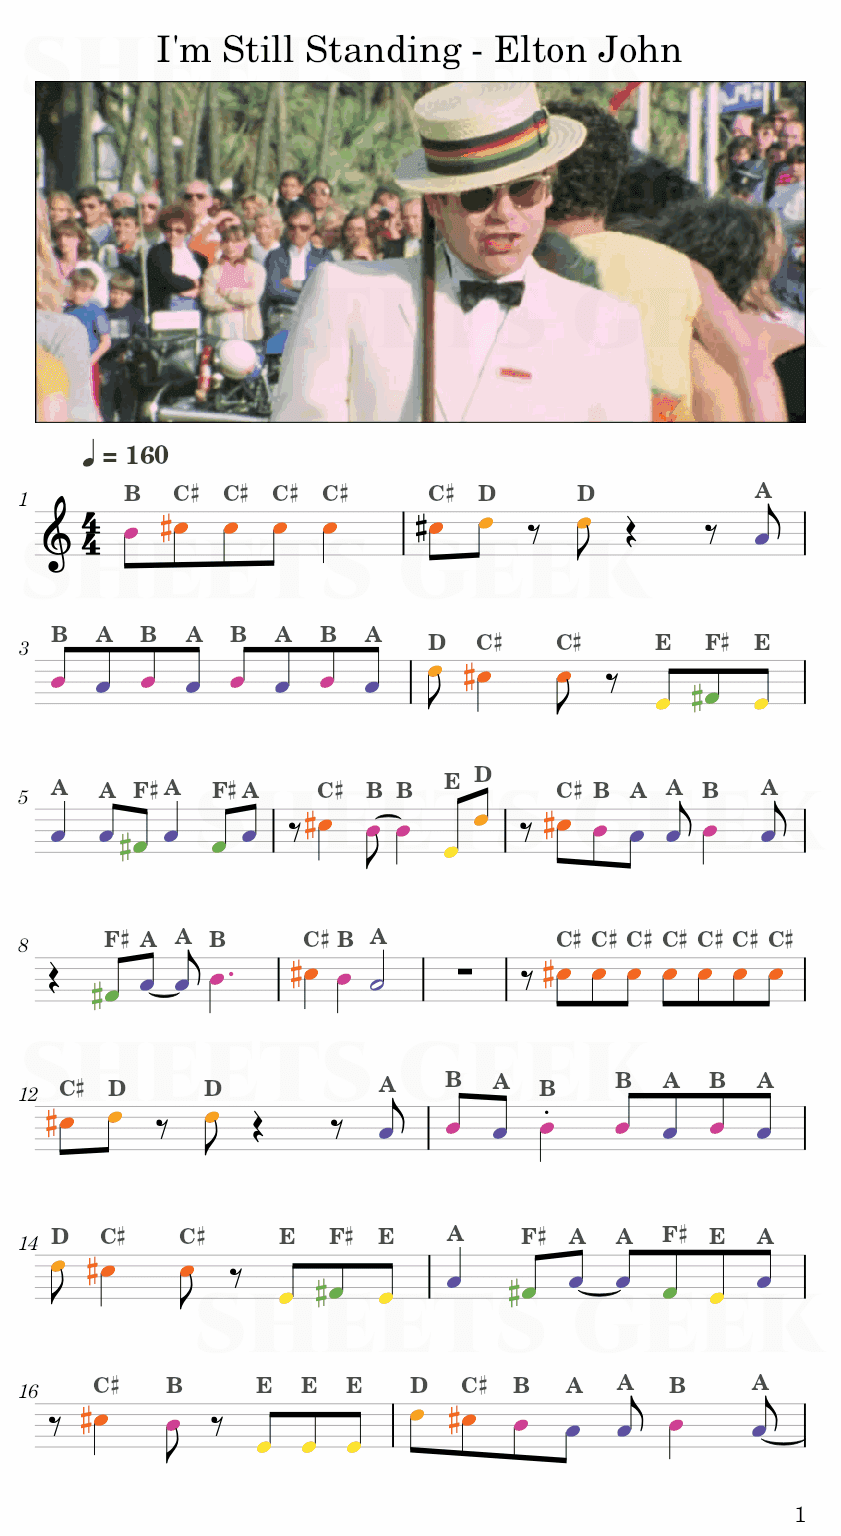 I'm Still Standing - Elton John Easy Sheet Music Free for piano, keyboard, flute, violin, sax, cello page 1